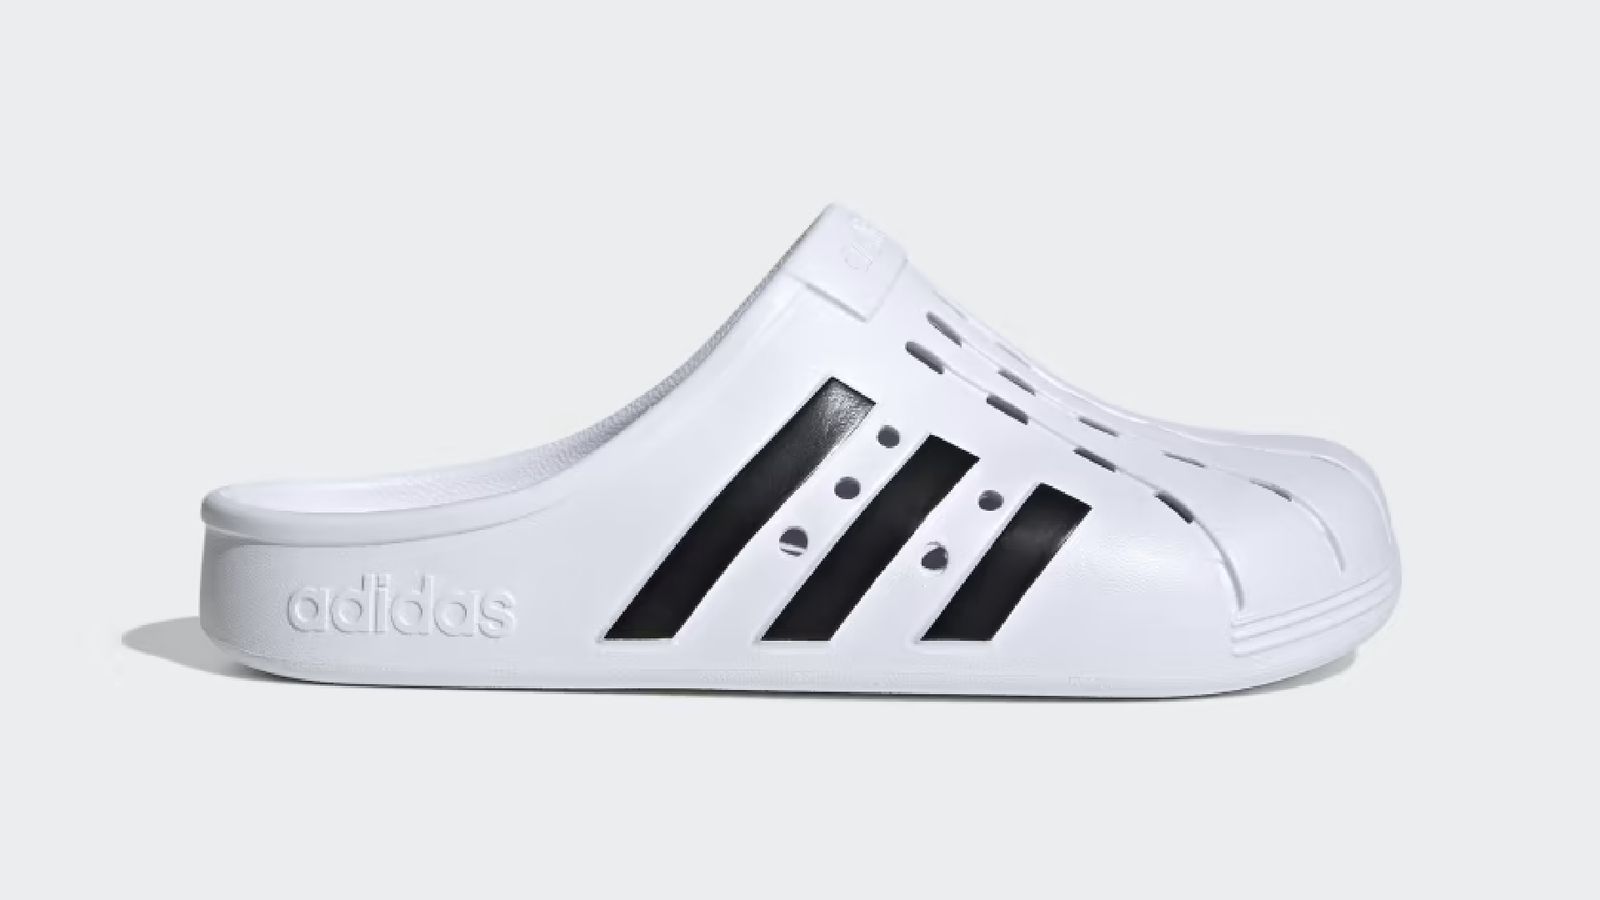 adidas Adilette Clogs product image of a white slip-on shoe with three black stripes down the side.